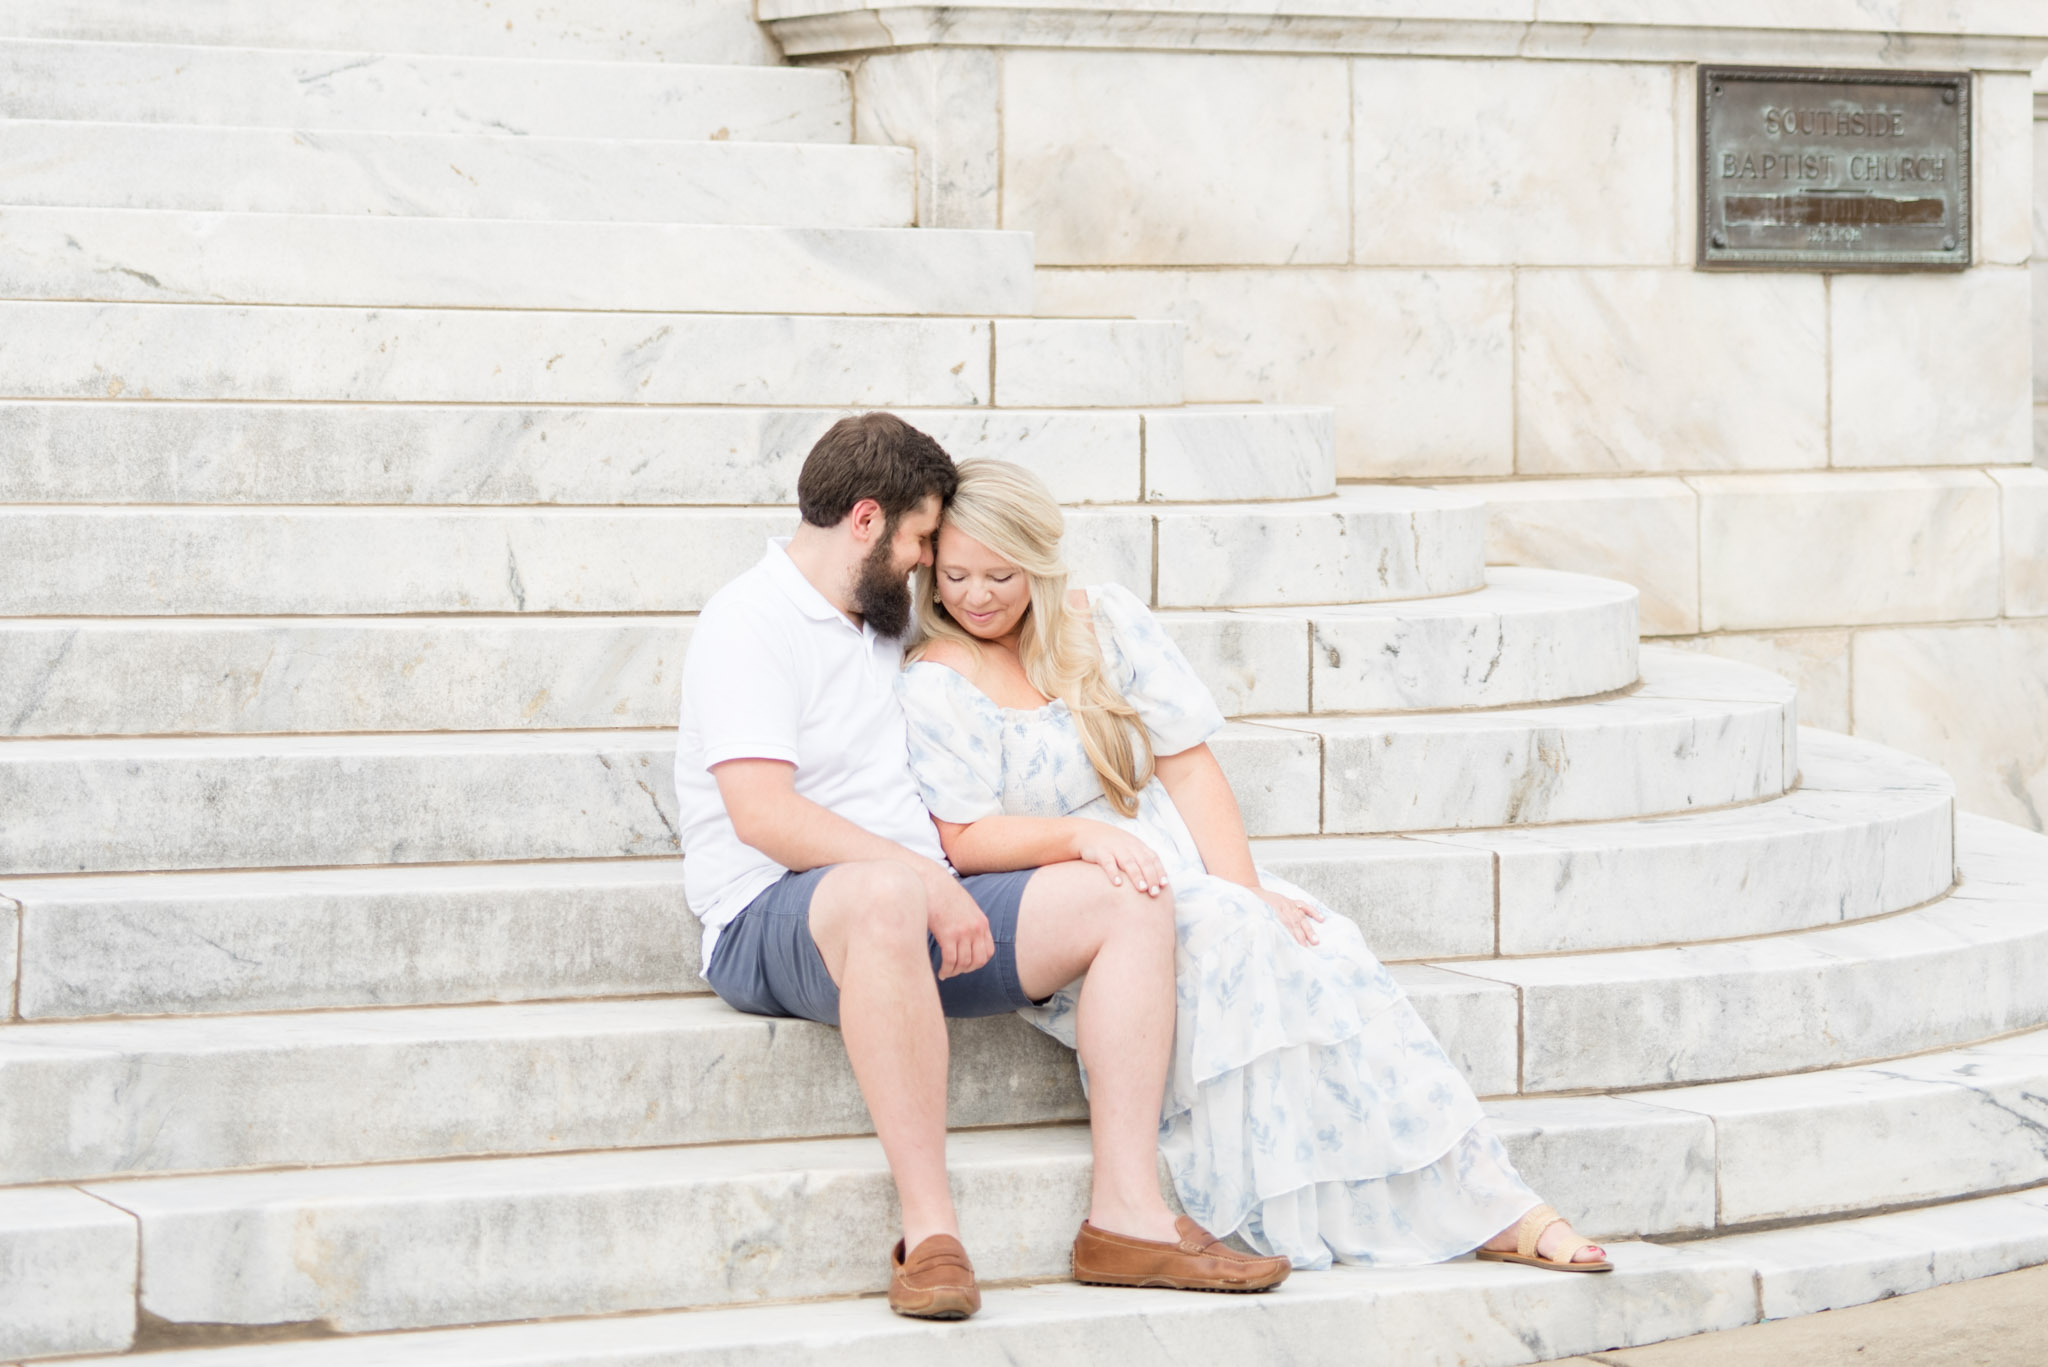 Husband and wife snuggle on marble stairs.